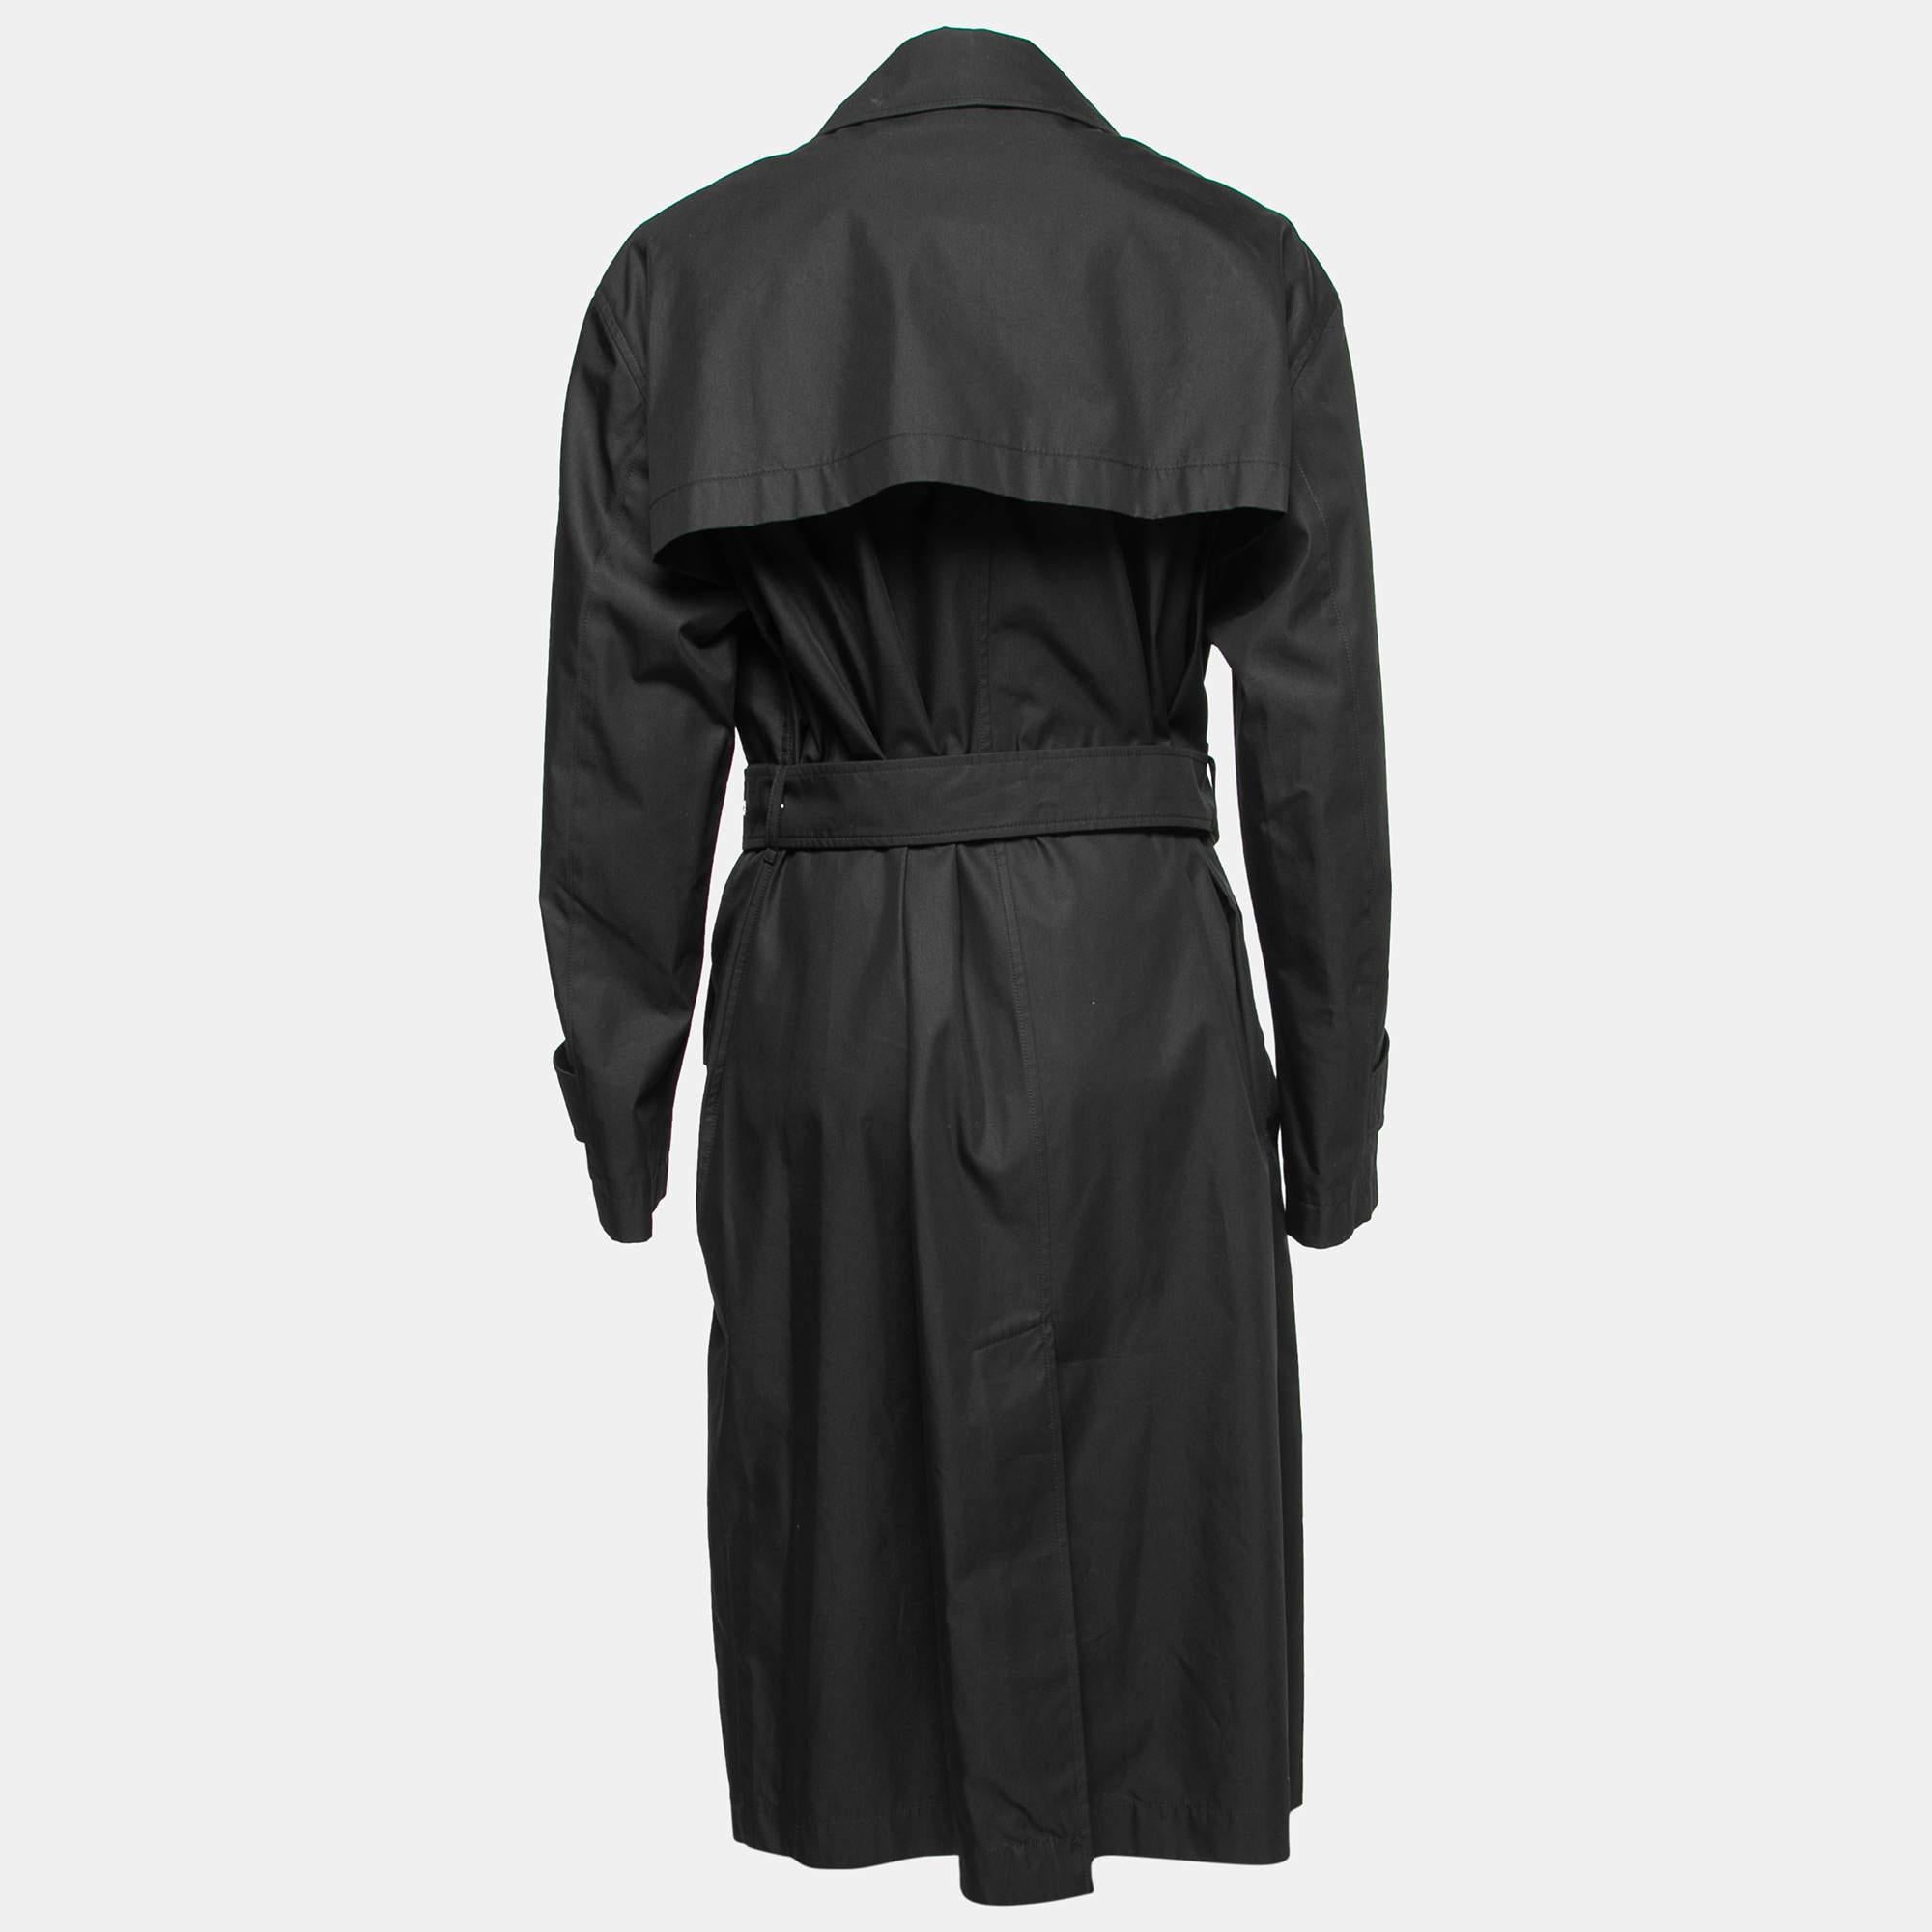 Coats like this one are an amazing accessory to polish your attire. Made from good fabrics and detailed with a noticeable design, this coat ensures your looks are always on point.

Includes: White dust bag, Brand Tag, Price Tag